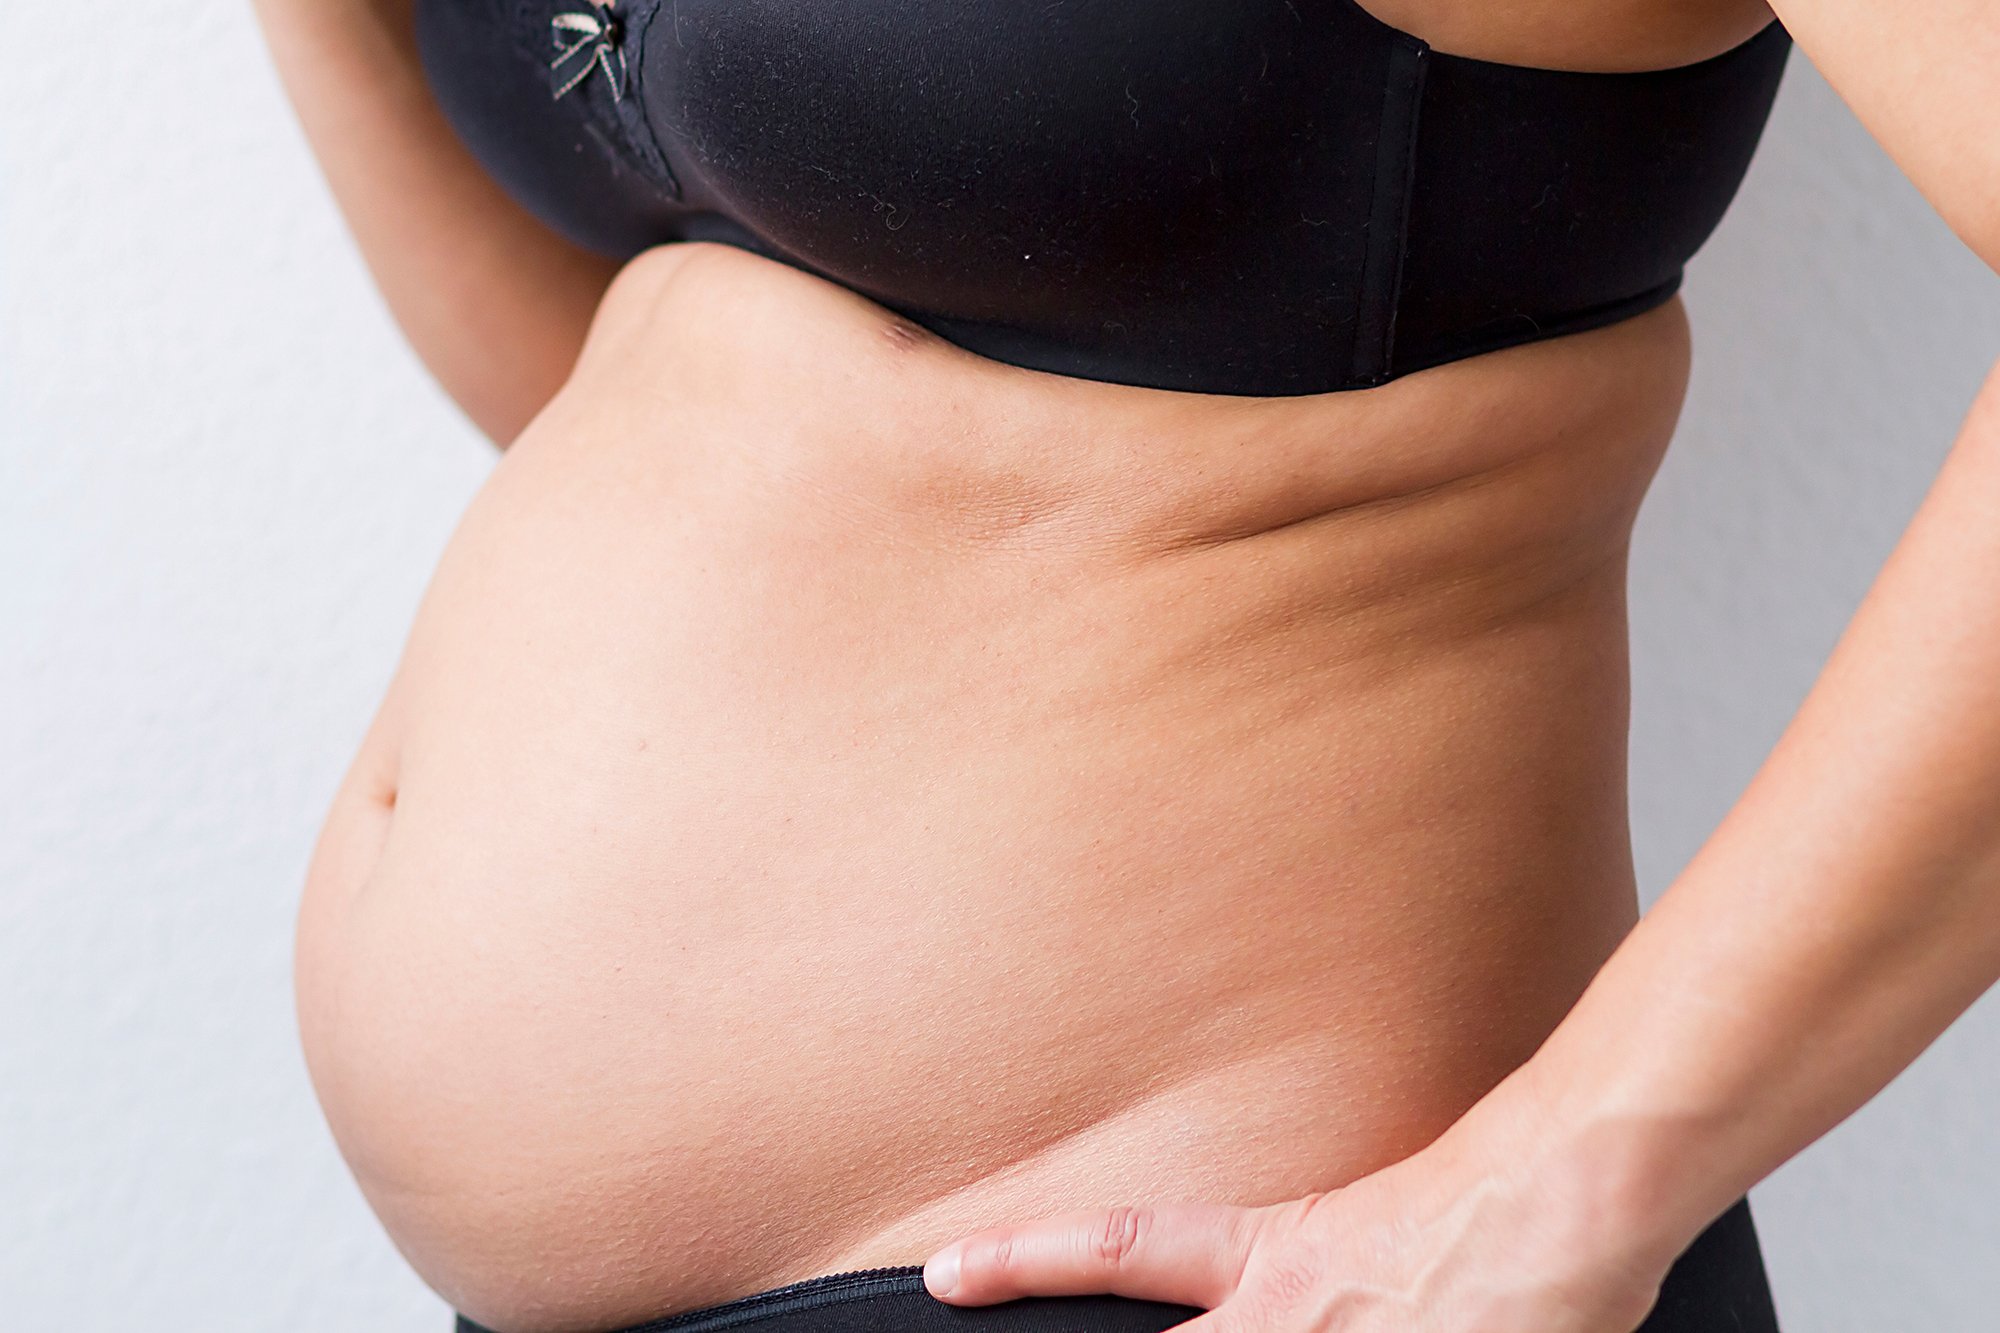 Why Am I So Bloated? 11 Causes of Belly Bloat